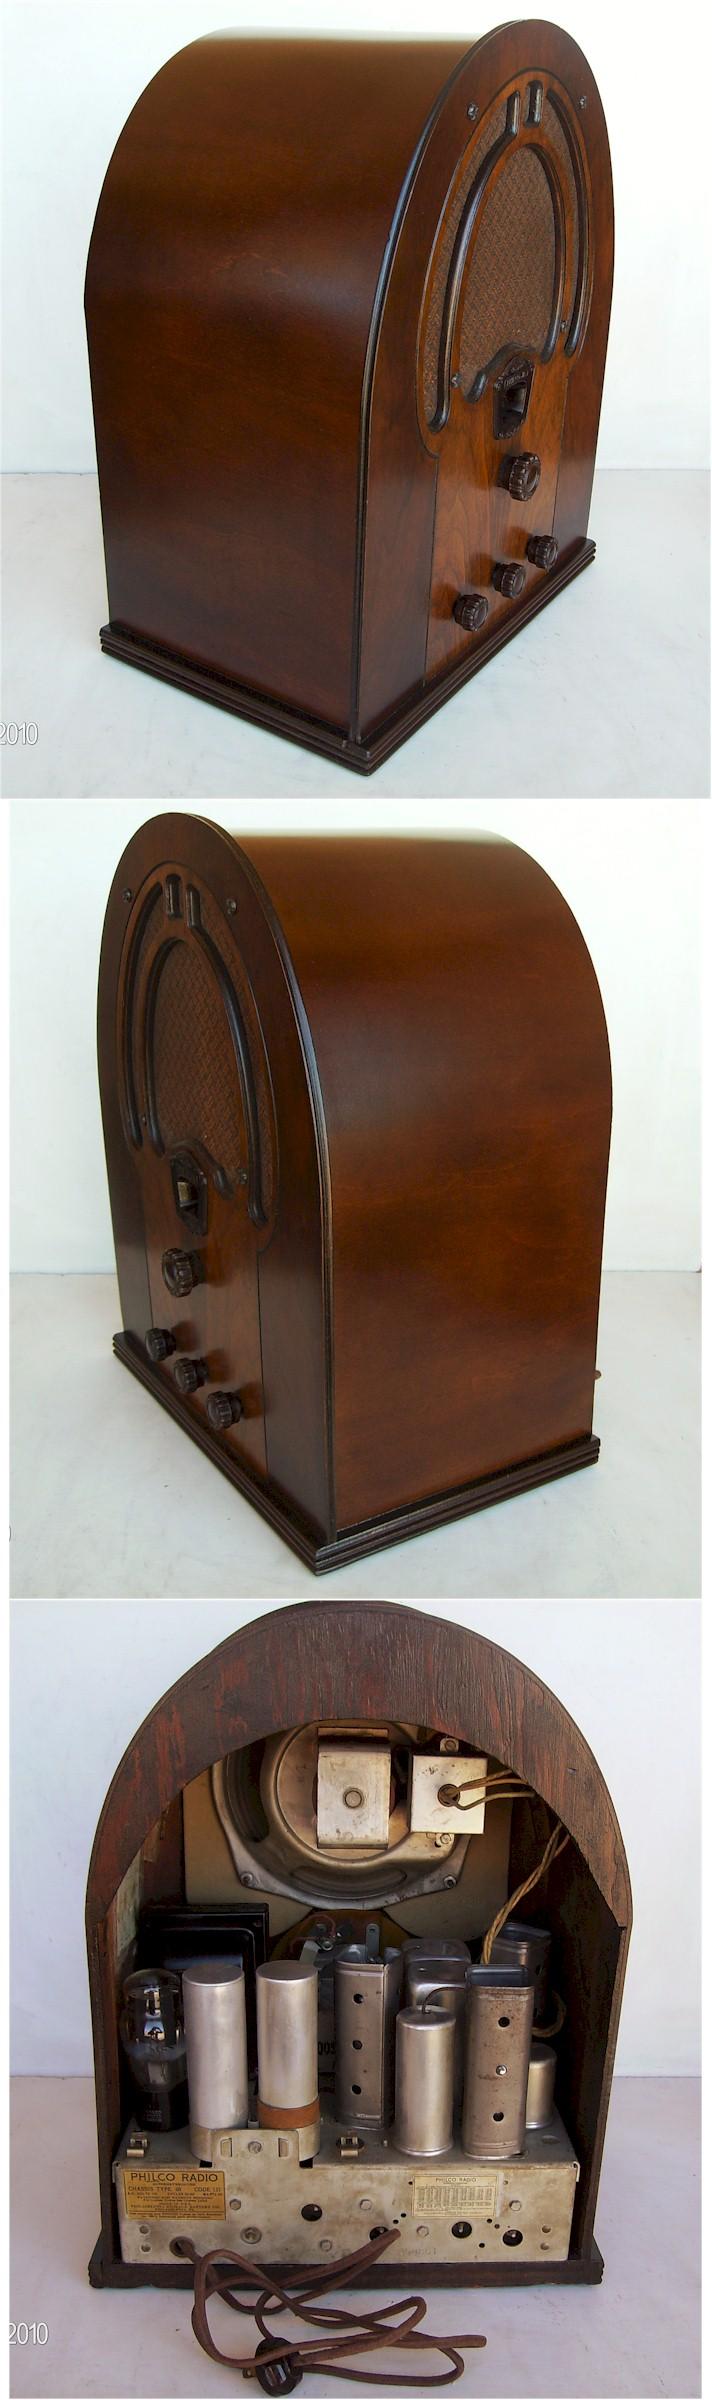 Philco 60 Cathedral (1934)